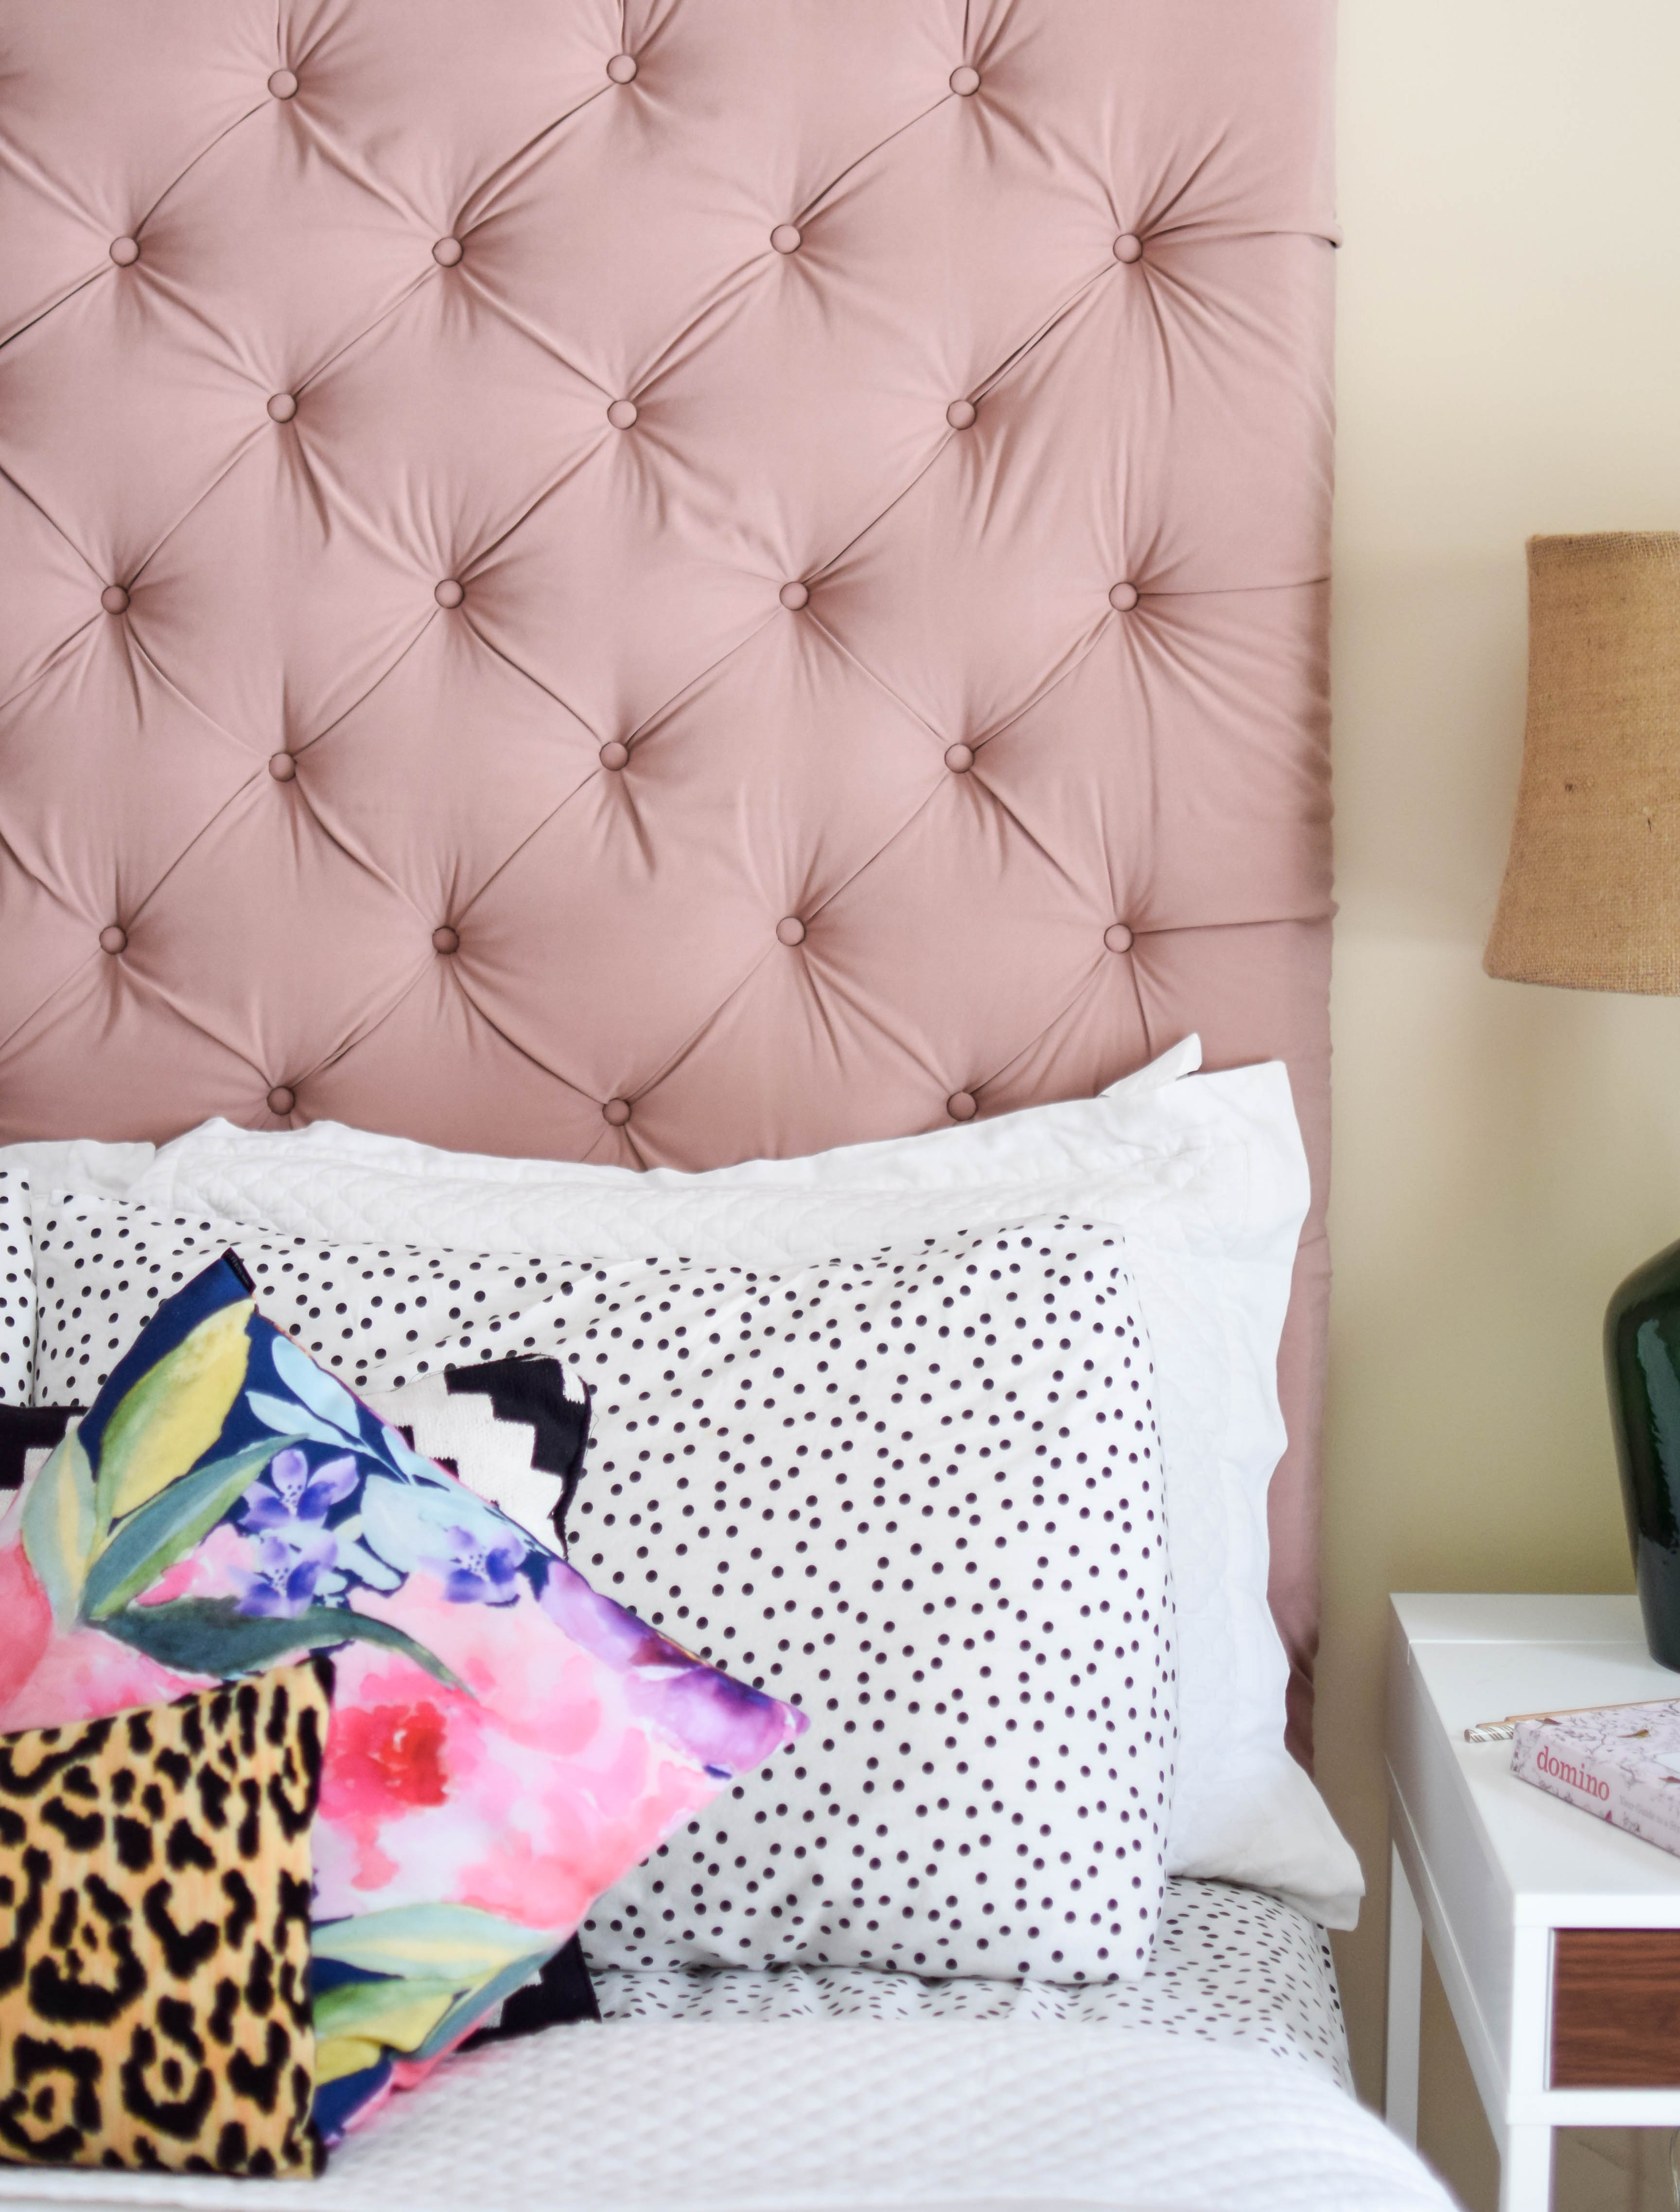 Diy Tufted Headboard Over Sized, How To Make An Upholstered Headboard For A King Size Bed